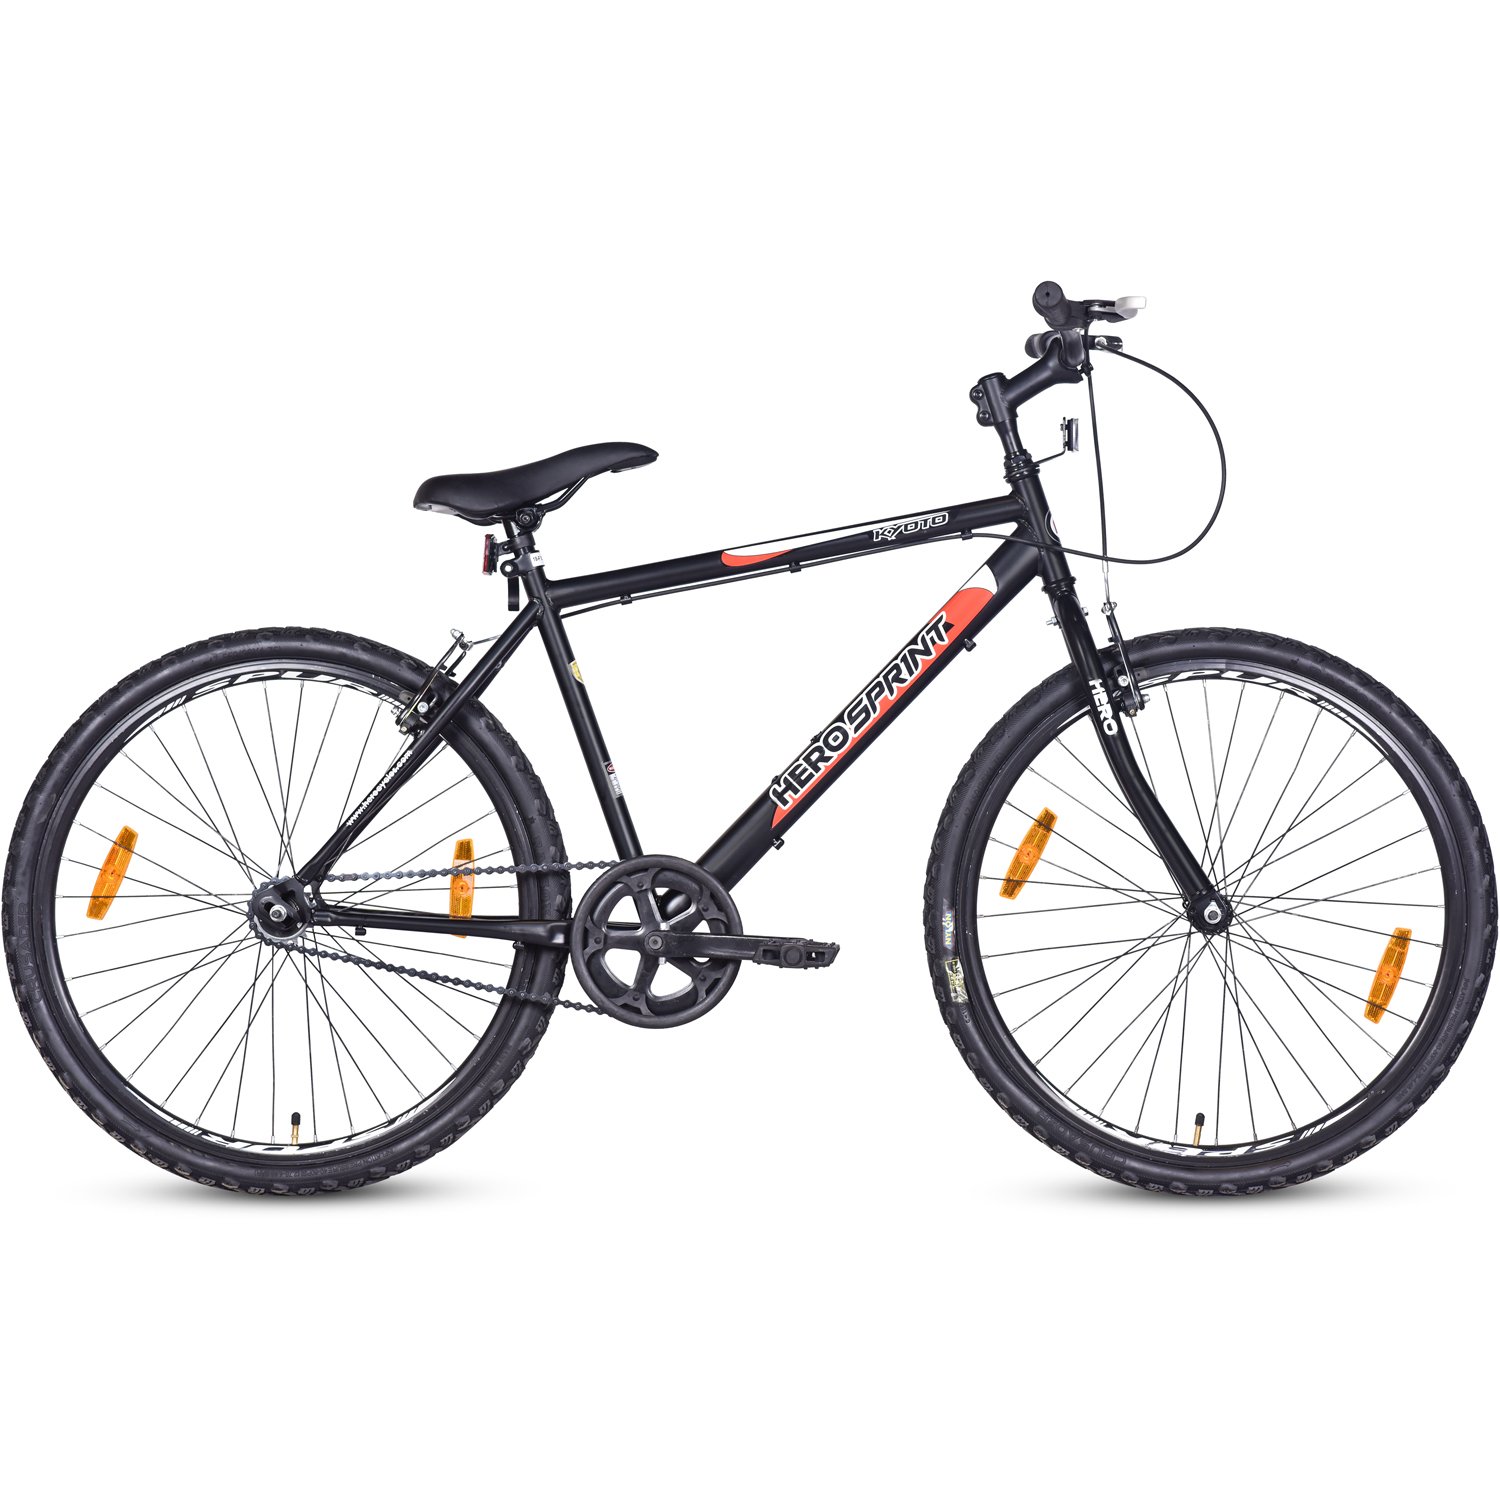 Hero Kyoto 26T Single Speed Mountain Bike Ideal For 12+ Years Boys and girls - 18 inch (Black)